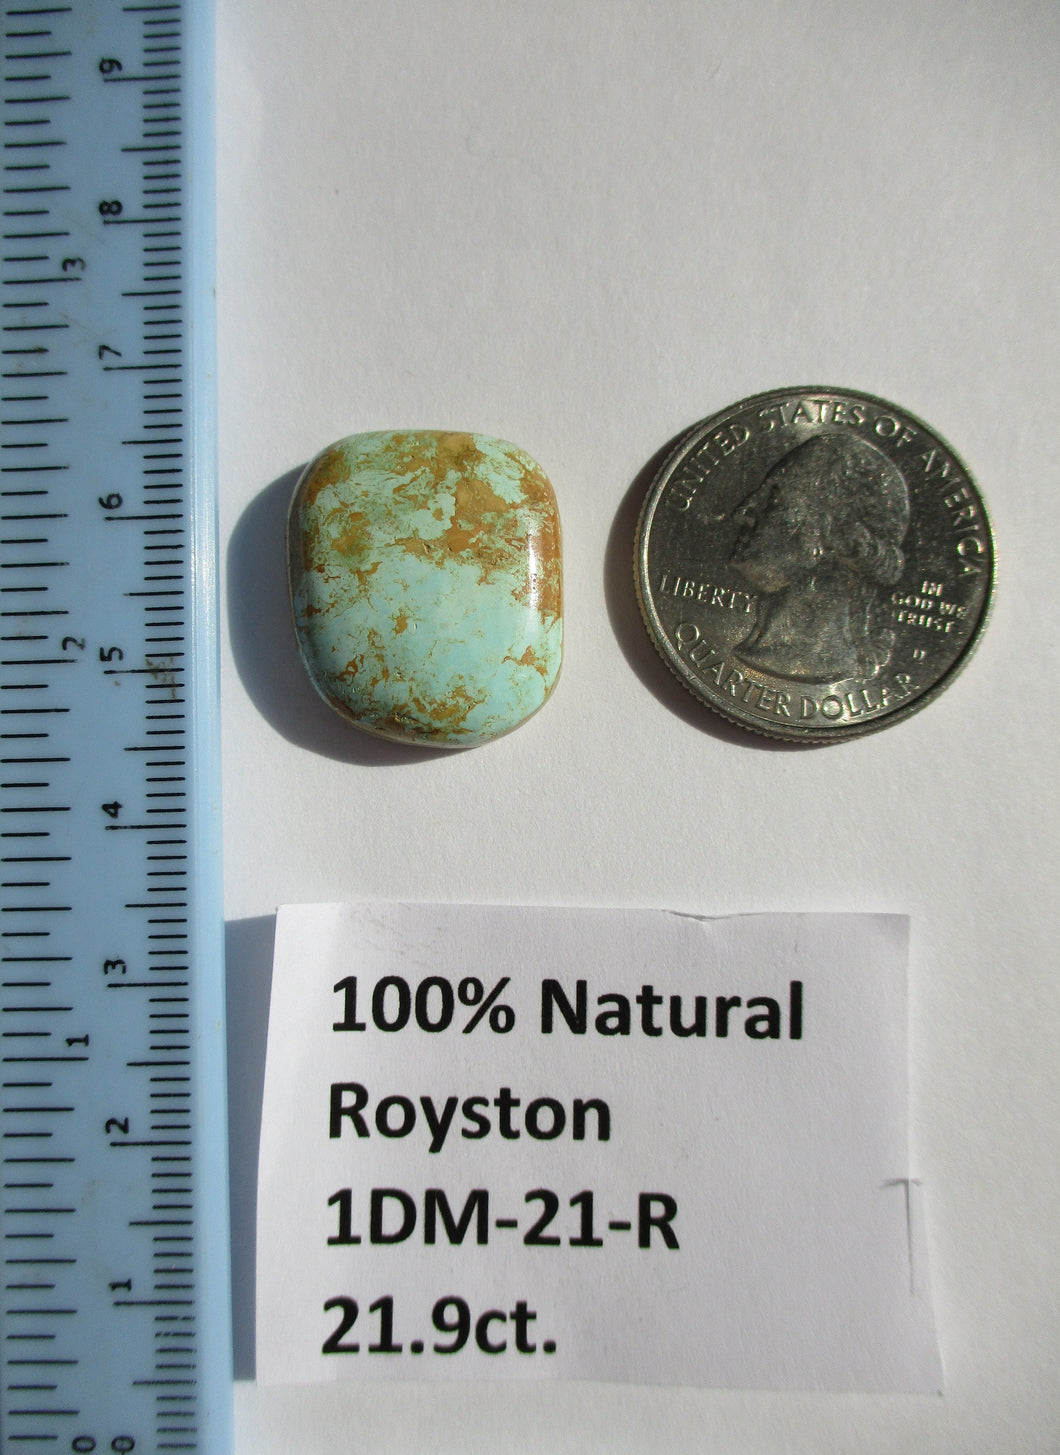 21.9 ct (22x19x6.5 mm) 100% Natural Royston Turquoise Cabochon Gemstone, 1DM 21